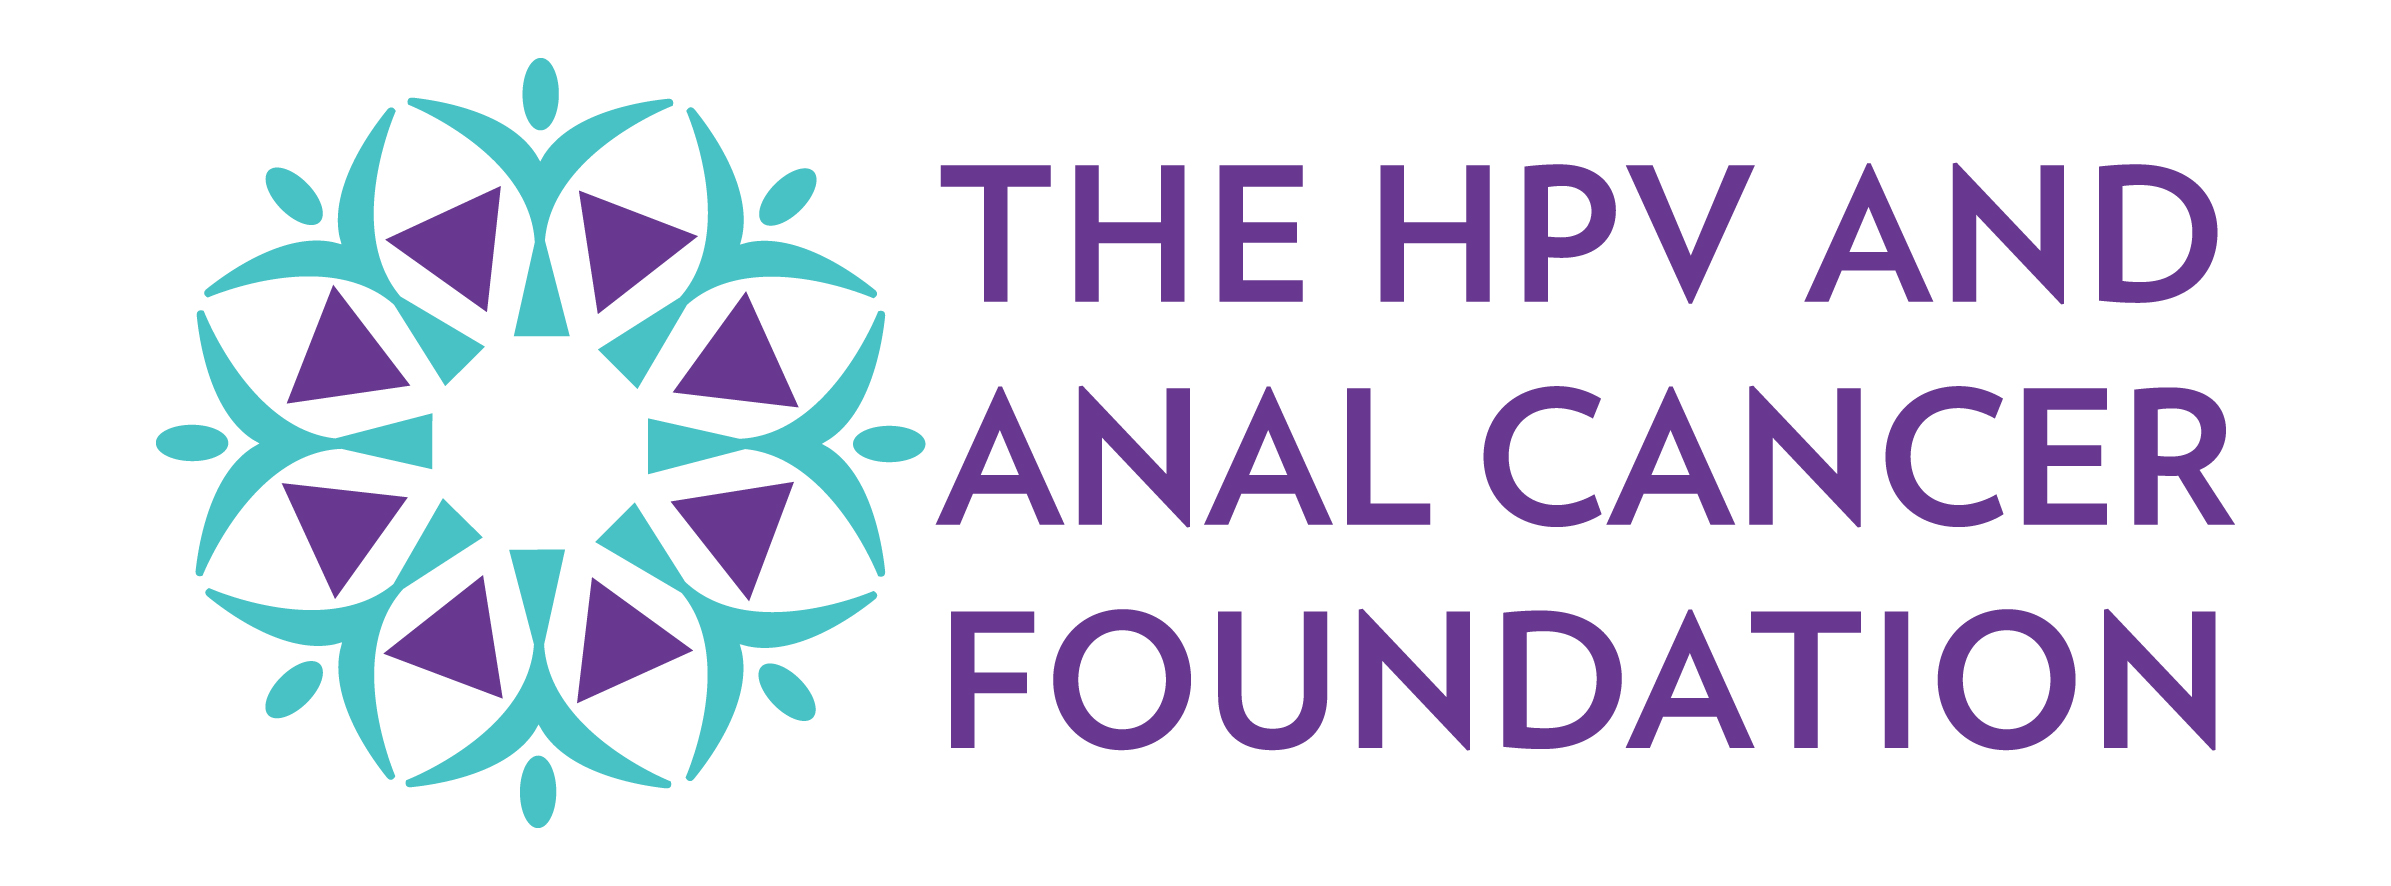 HPV and Anal Cancer Foundation - New York USA United States of America